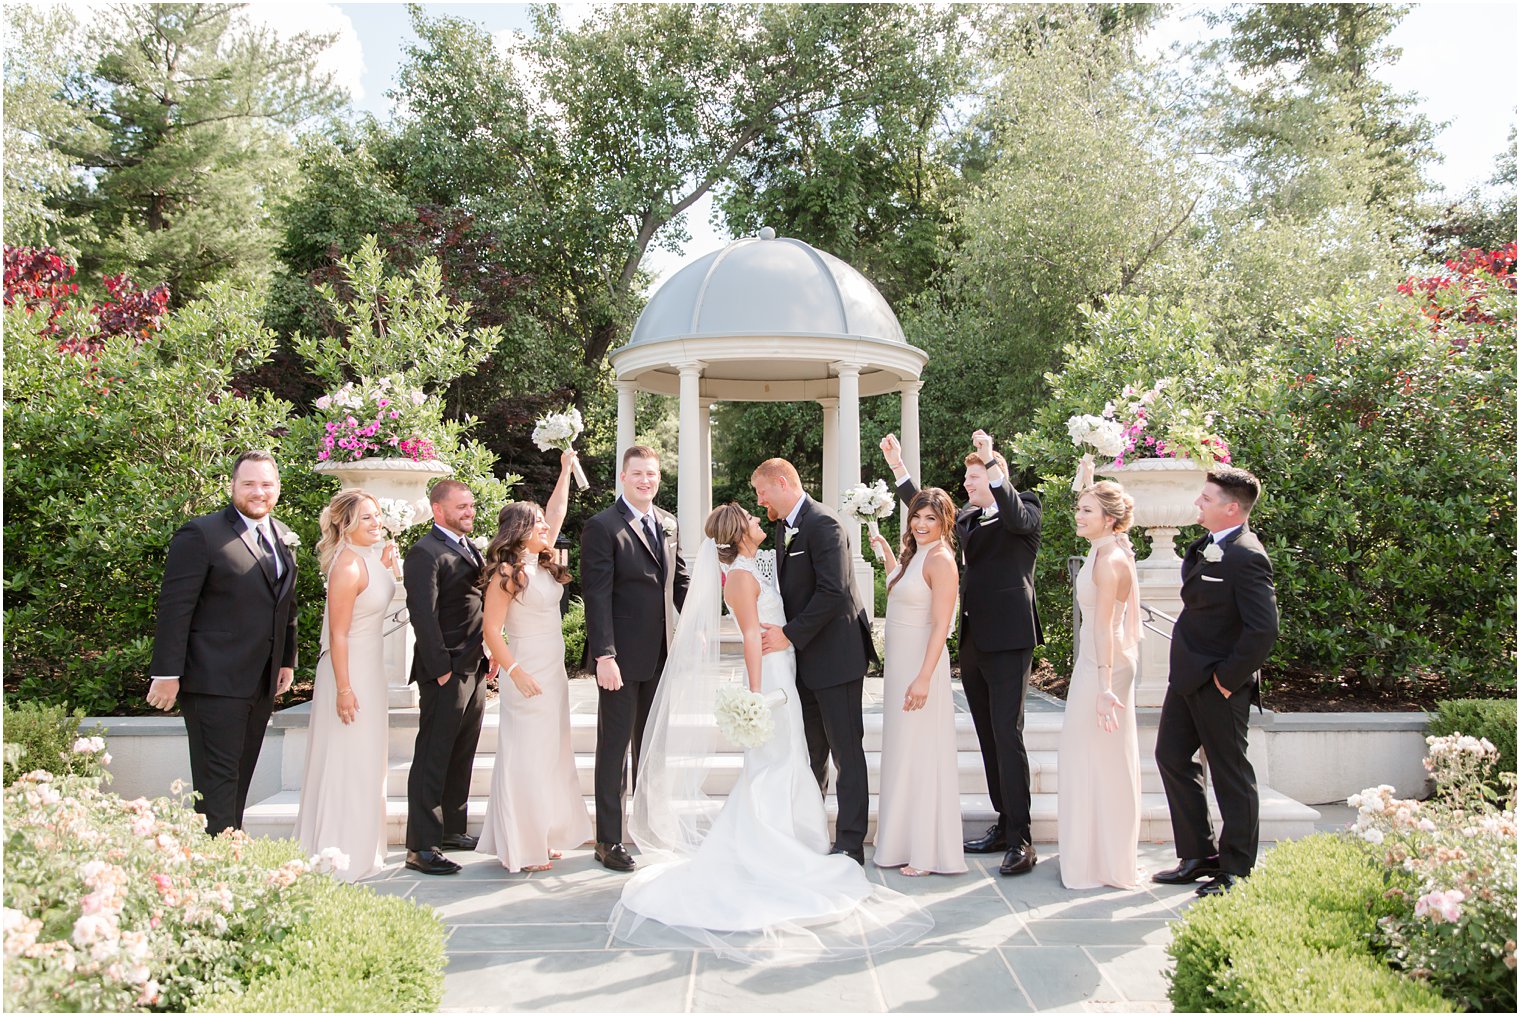 Bridal party portraits at Park Chateau Estate and Gardens